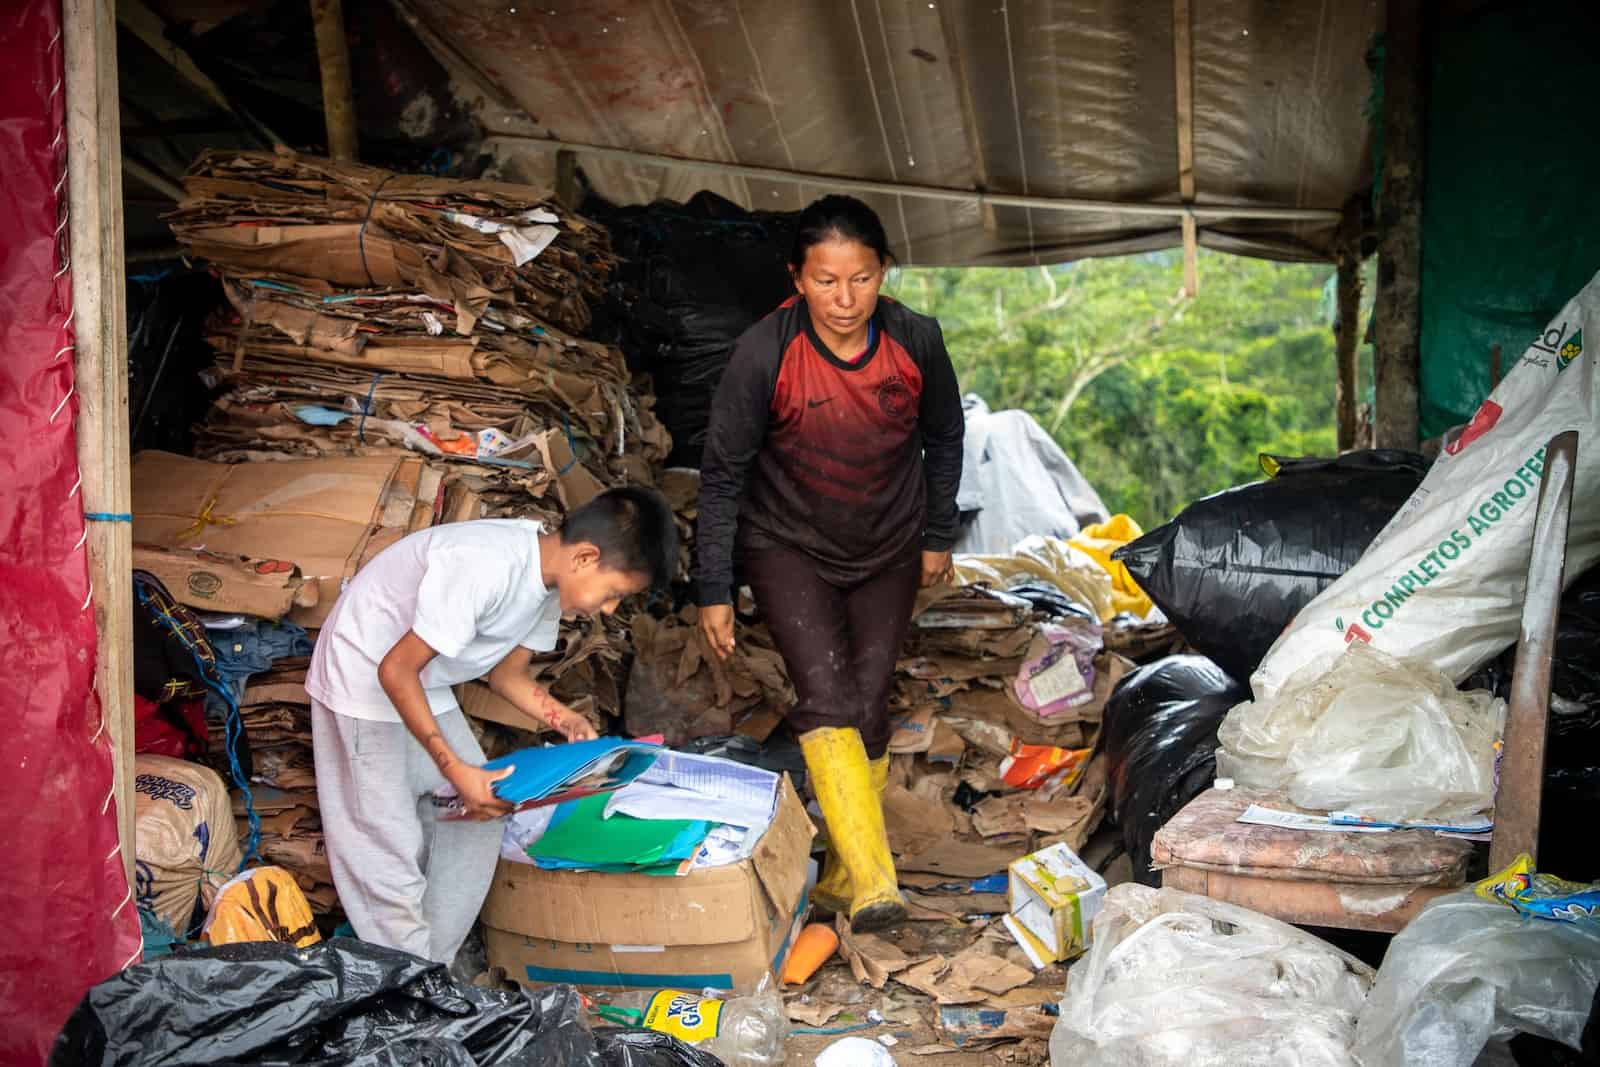 A woman and boy stand in a landfill warehouse, sorting cardboard.